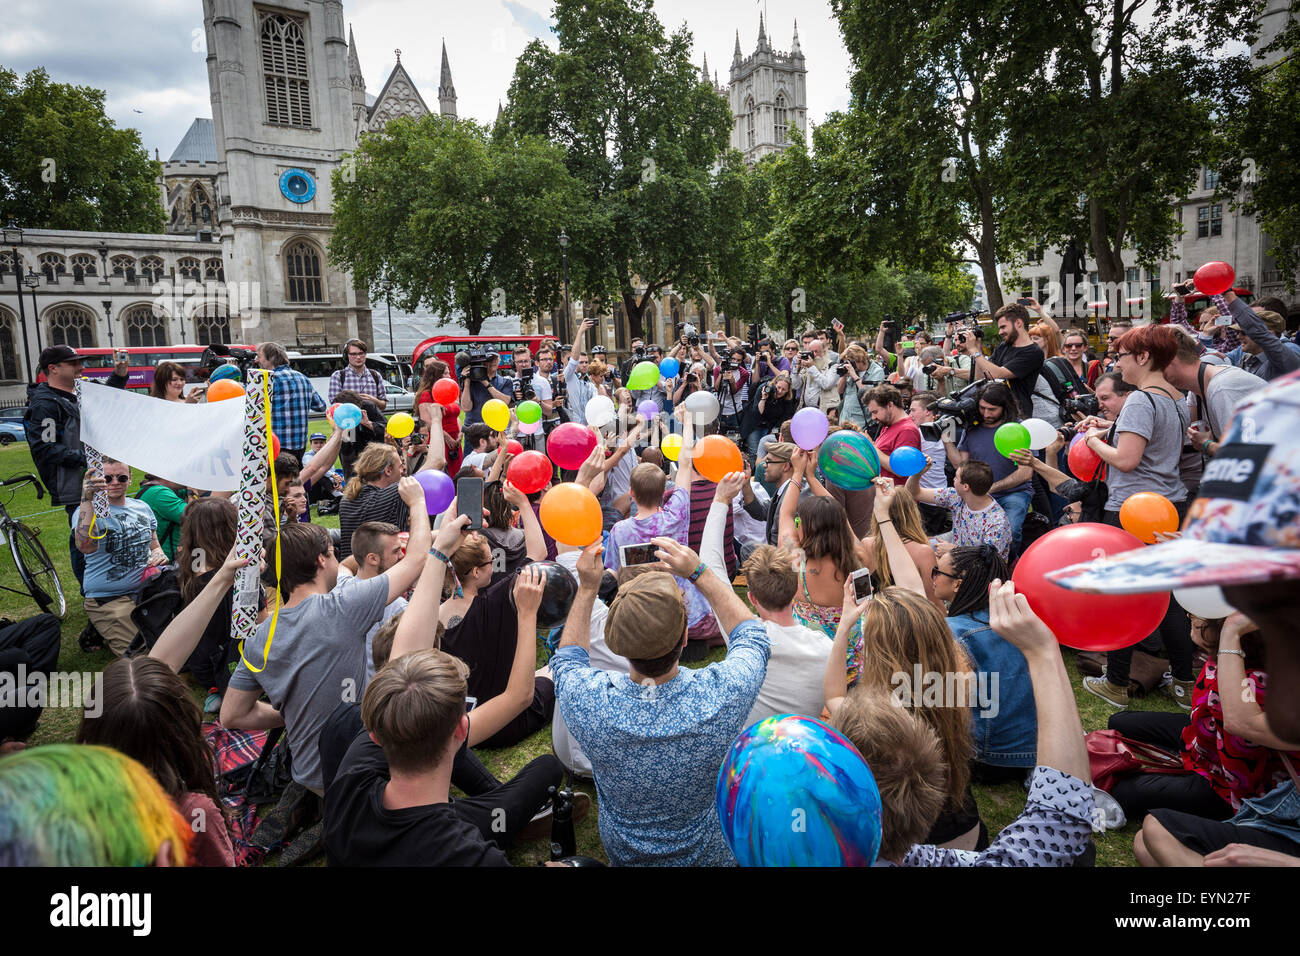 London, UK. 1st August, 2015. Campaigners inhale balloons inflated with nitrous oxide, commonly known as “laughing gas” to get high during a protest in Westminster’s Parliament Square against a proposed bill that aims to make selling any psychoactive substance illegal. Credit: Guy Corbishley/Alamy Live News Stock Photo